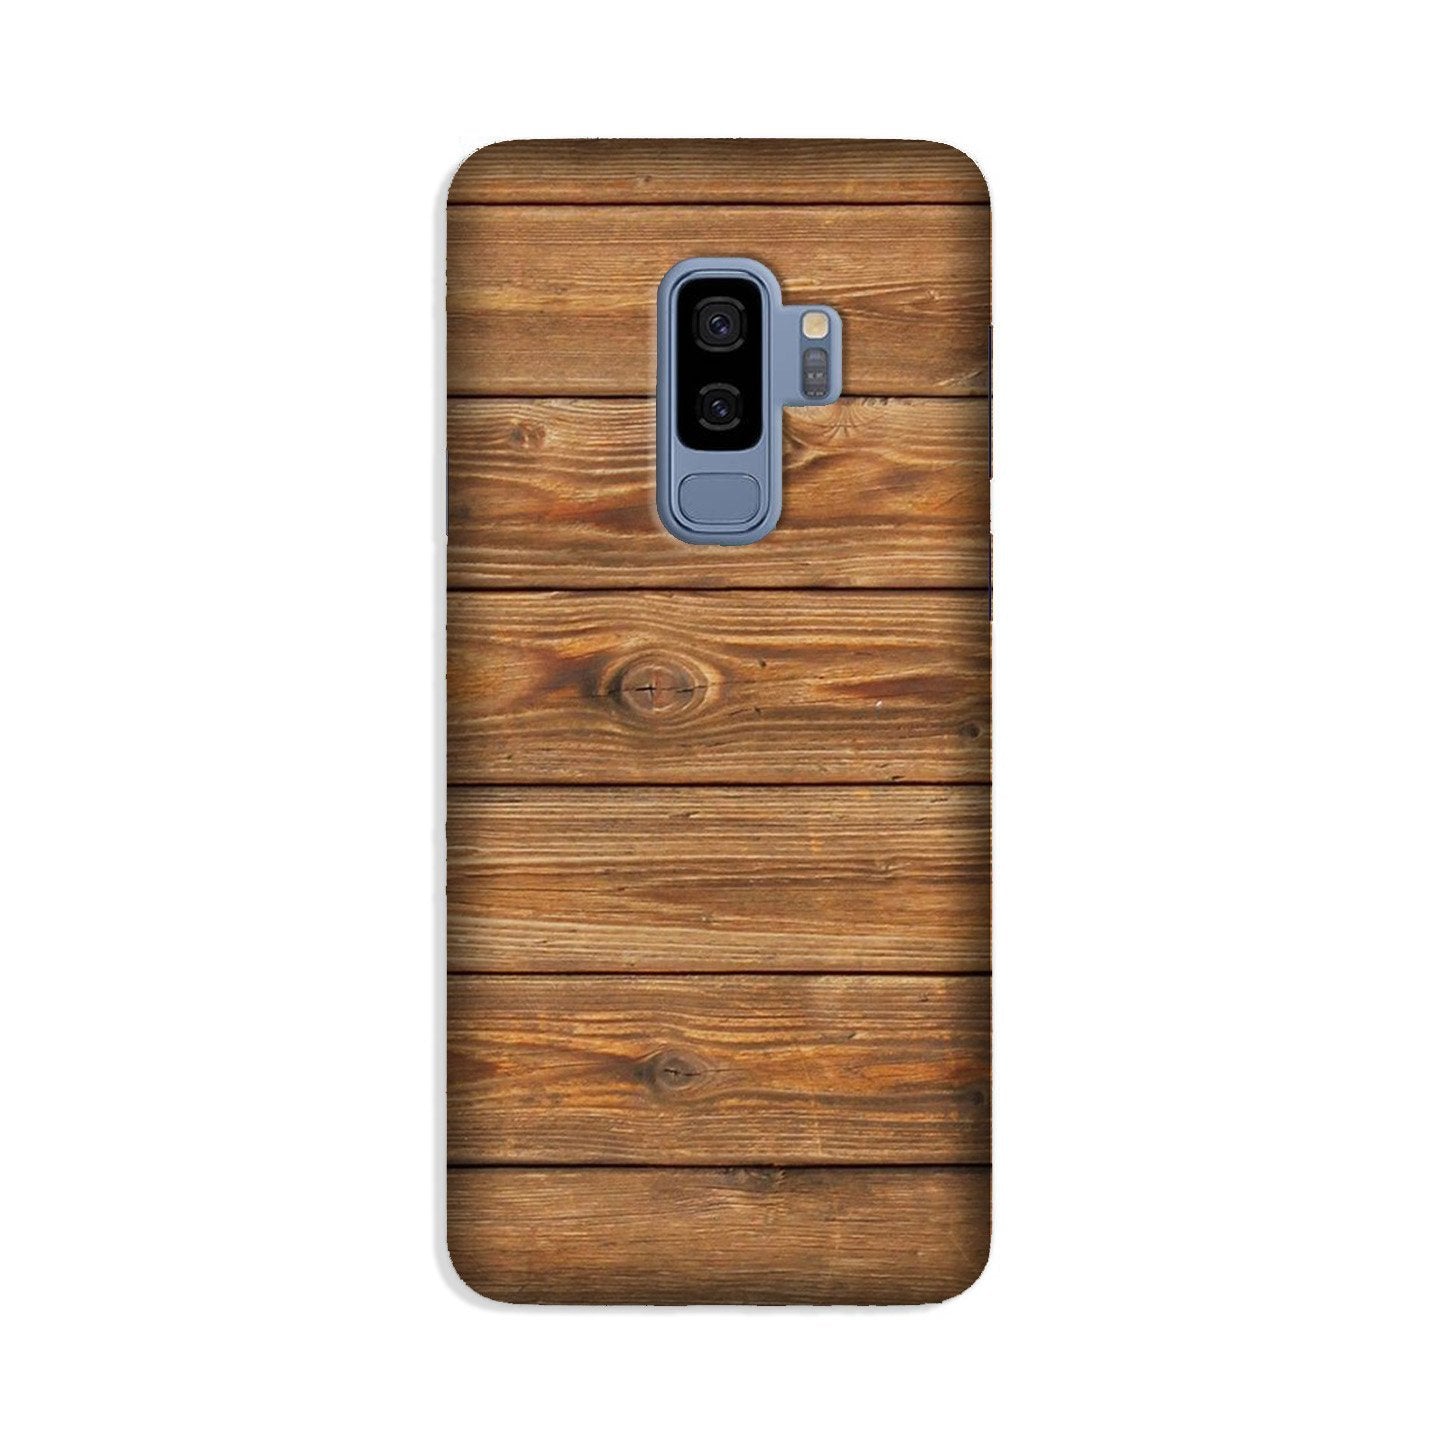 Wooden Look Case for Galaxy S9 Plus  (Design - 113)